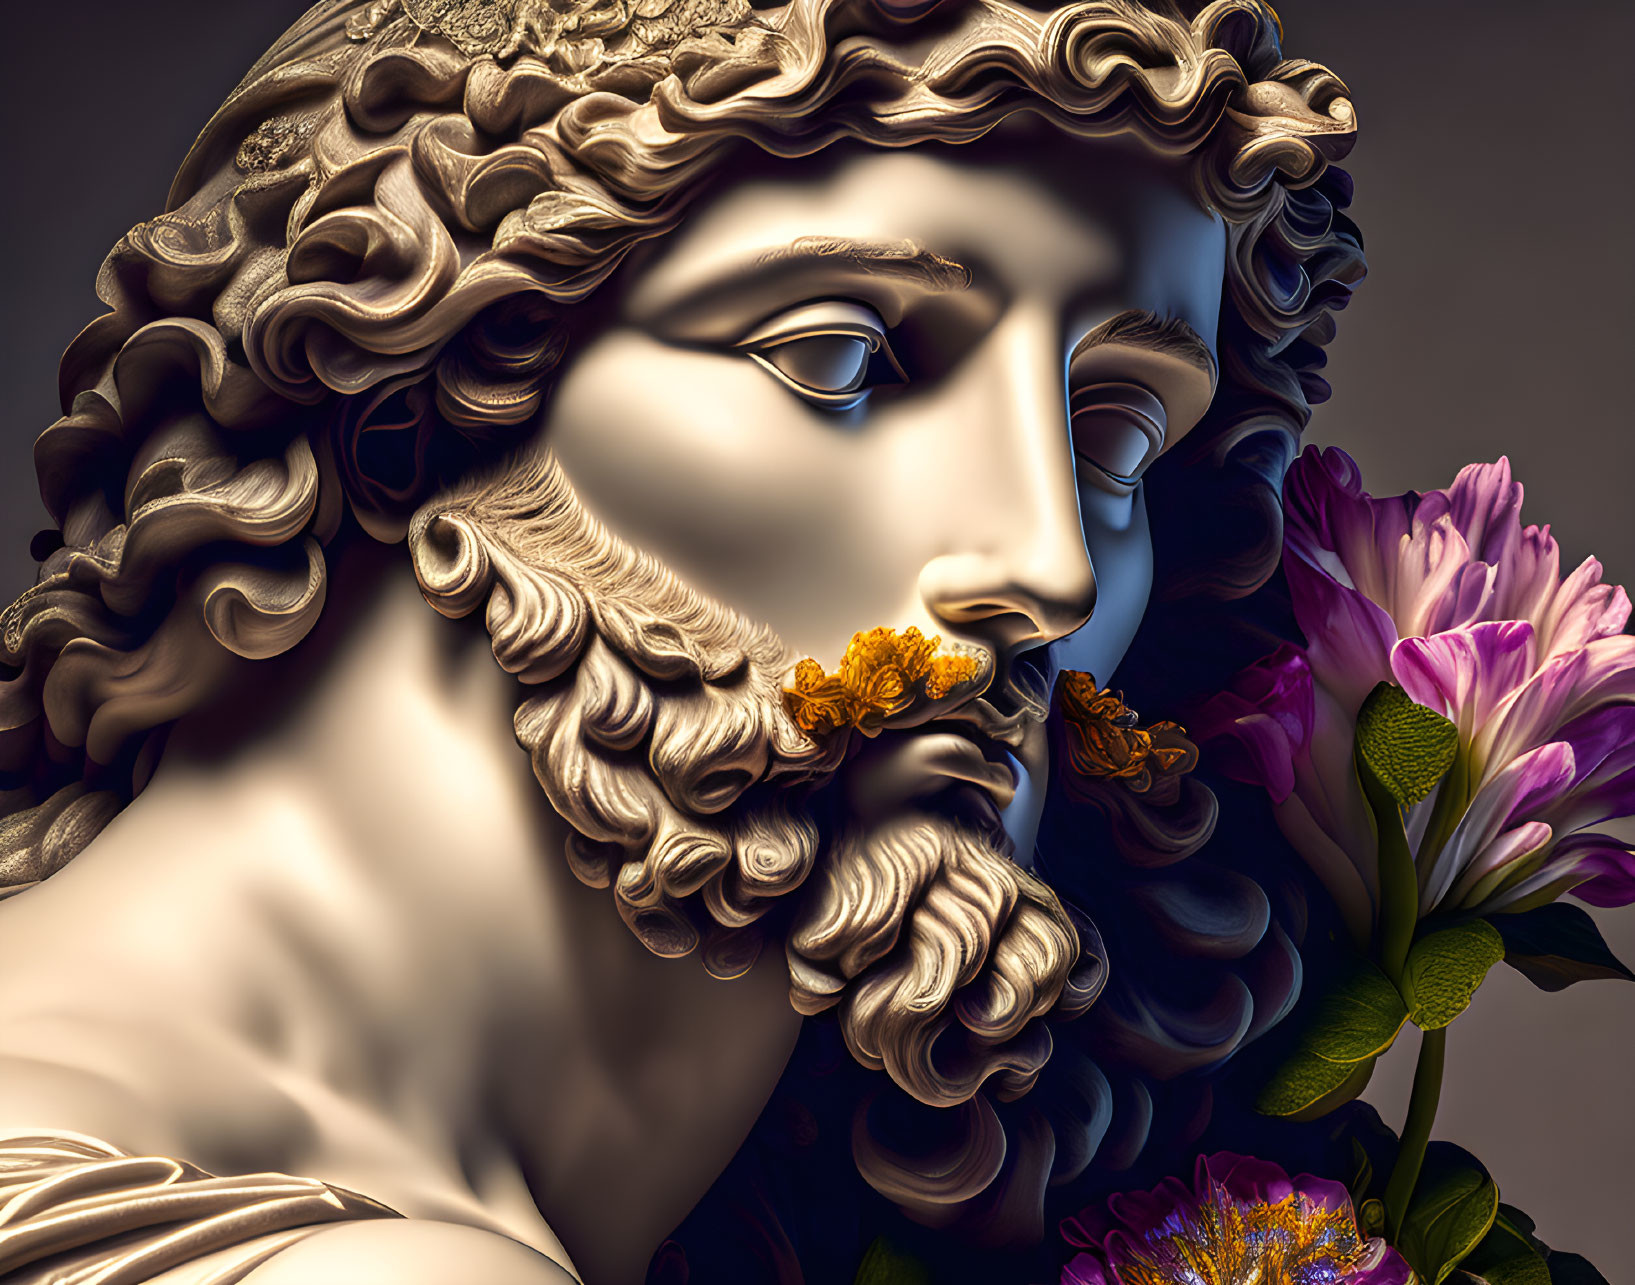 Classical sculpture of man with curly hair and beard, flowers covering mouth on grey background